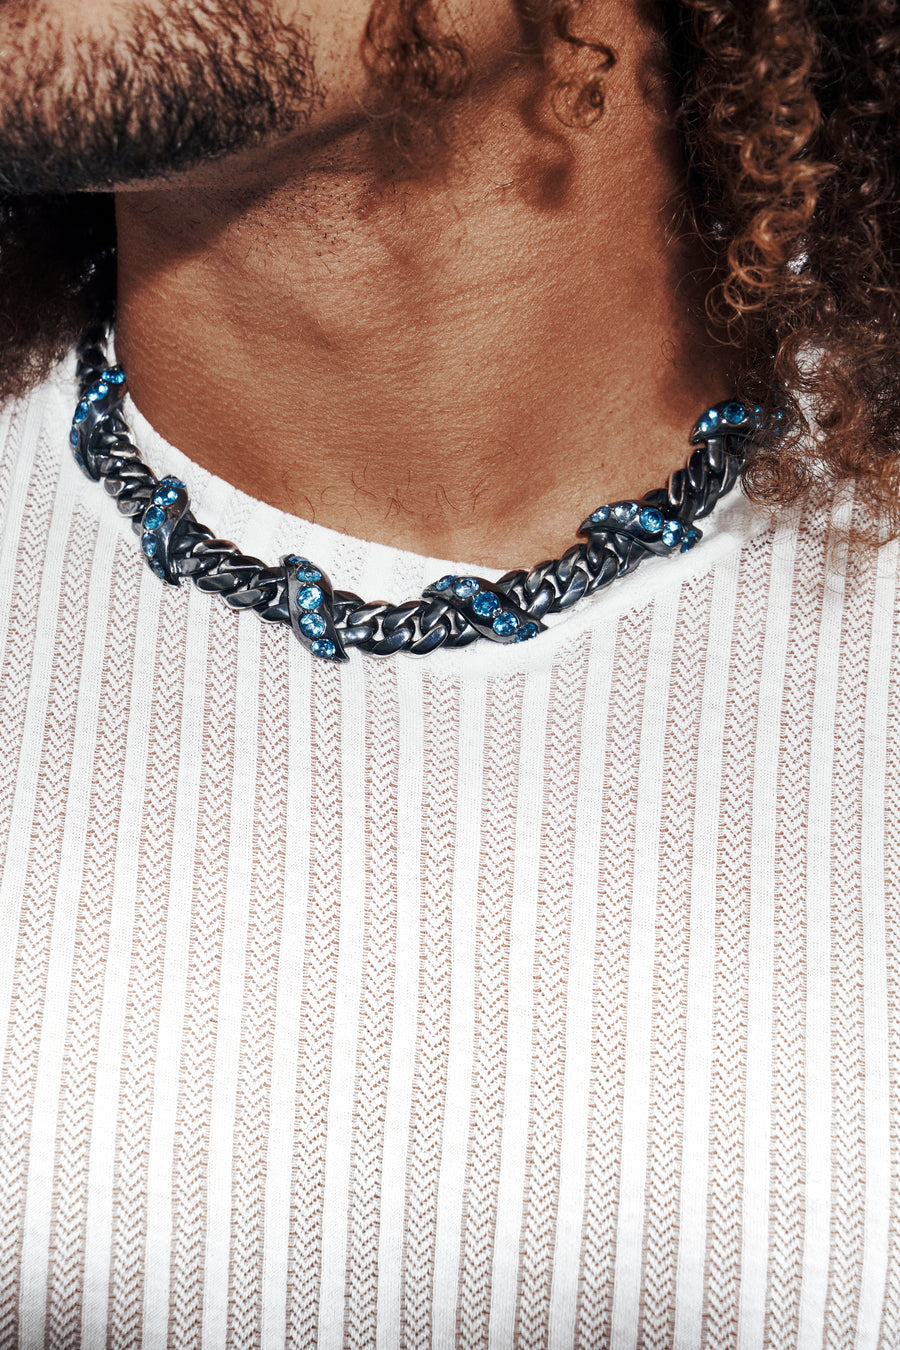 Blue Topaz Cuban Link Necklace With Antique Finish